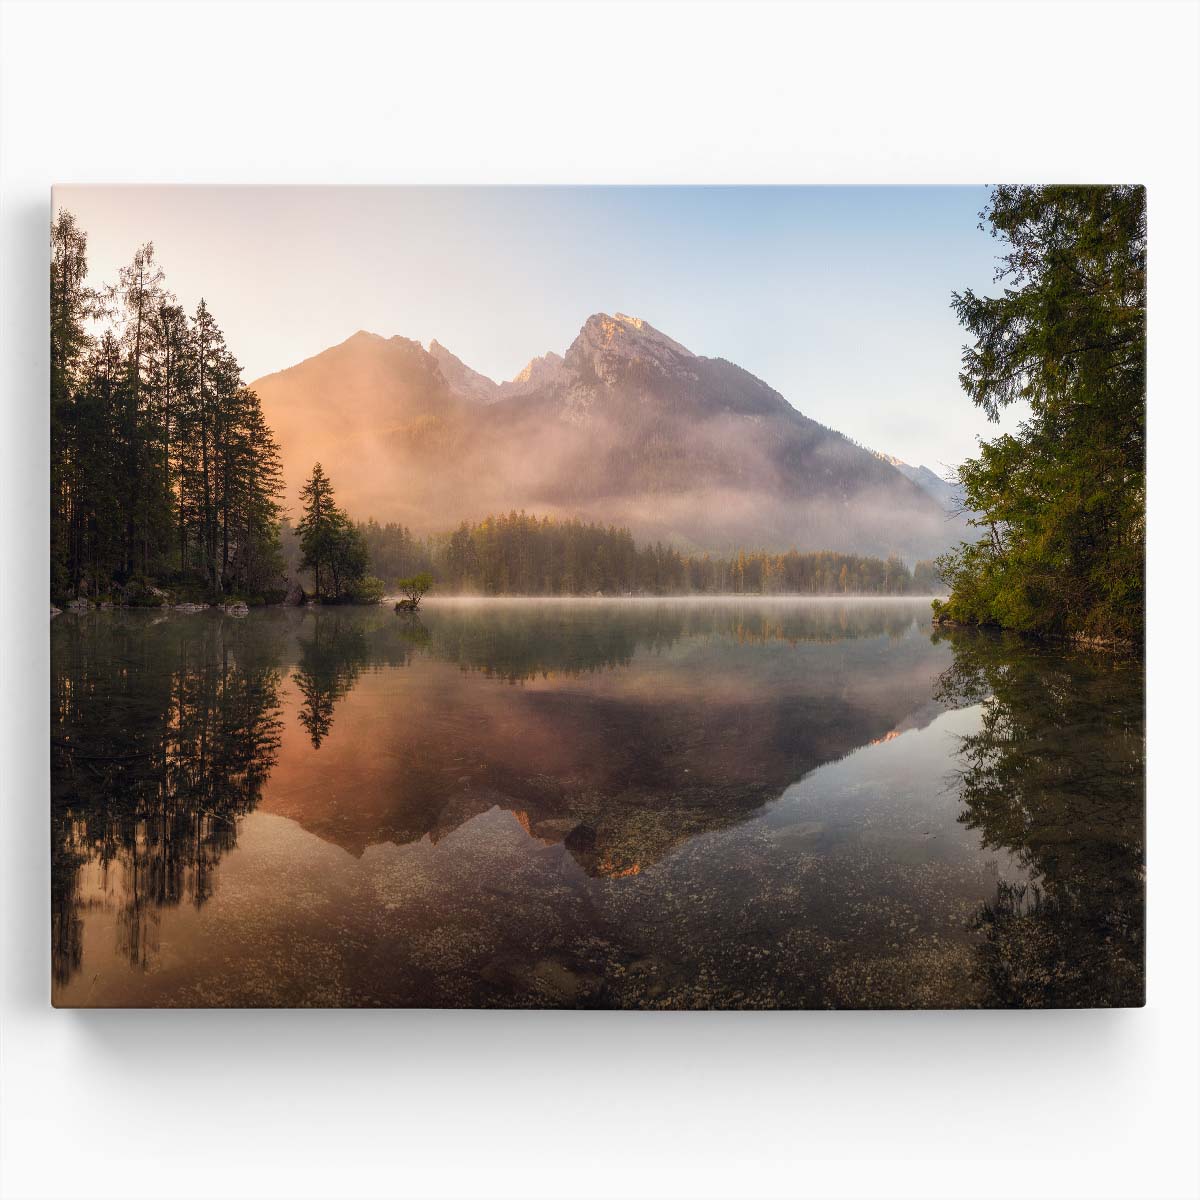 Glowing Mist Mountain Sunrise Serene Landscape Photography Wall Art by Luxuriance Designs. Made in USA.